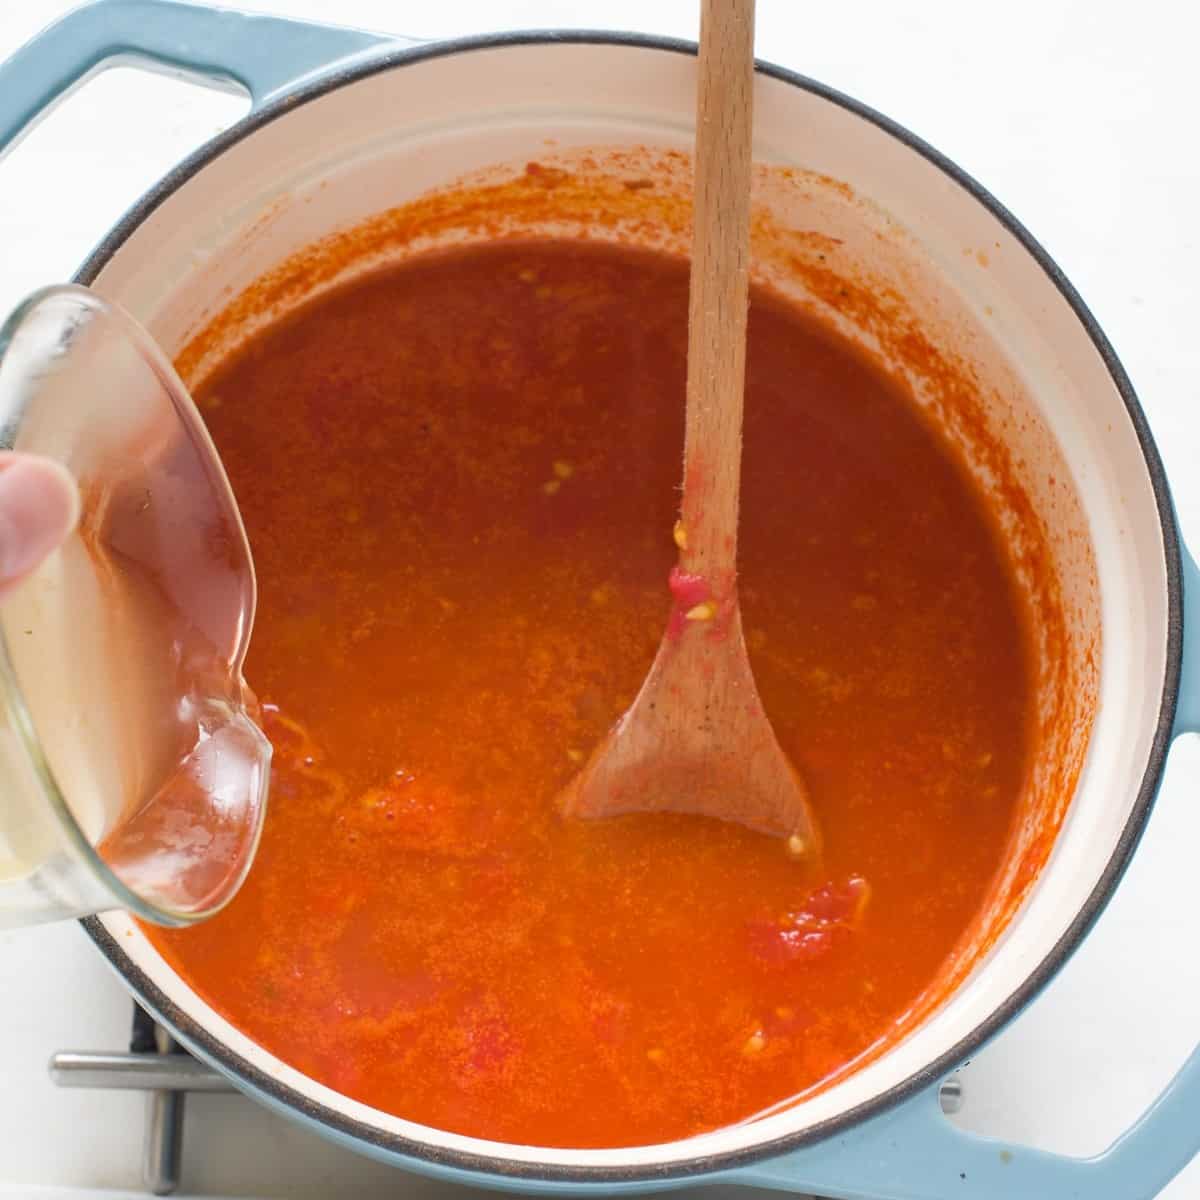 Making tomato soup with broth, in a blue pot.